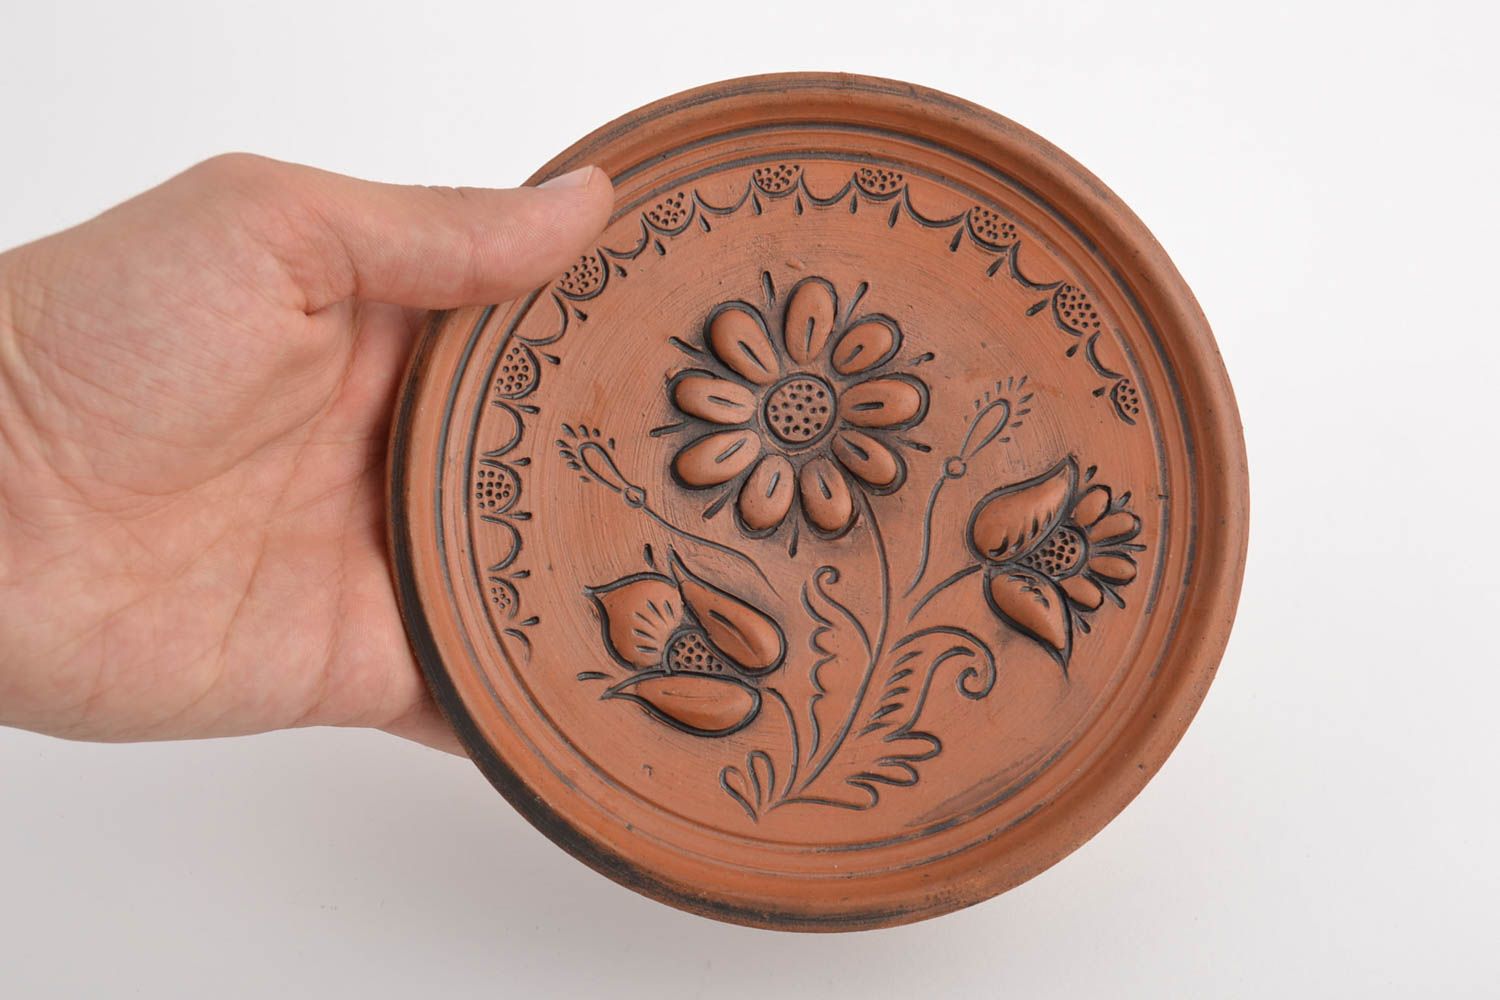 Handmade decorative ceramic wall plate with relief flower image kilned with milk photo 5